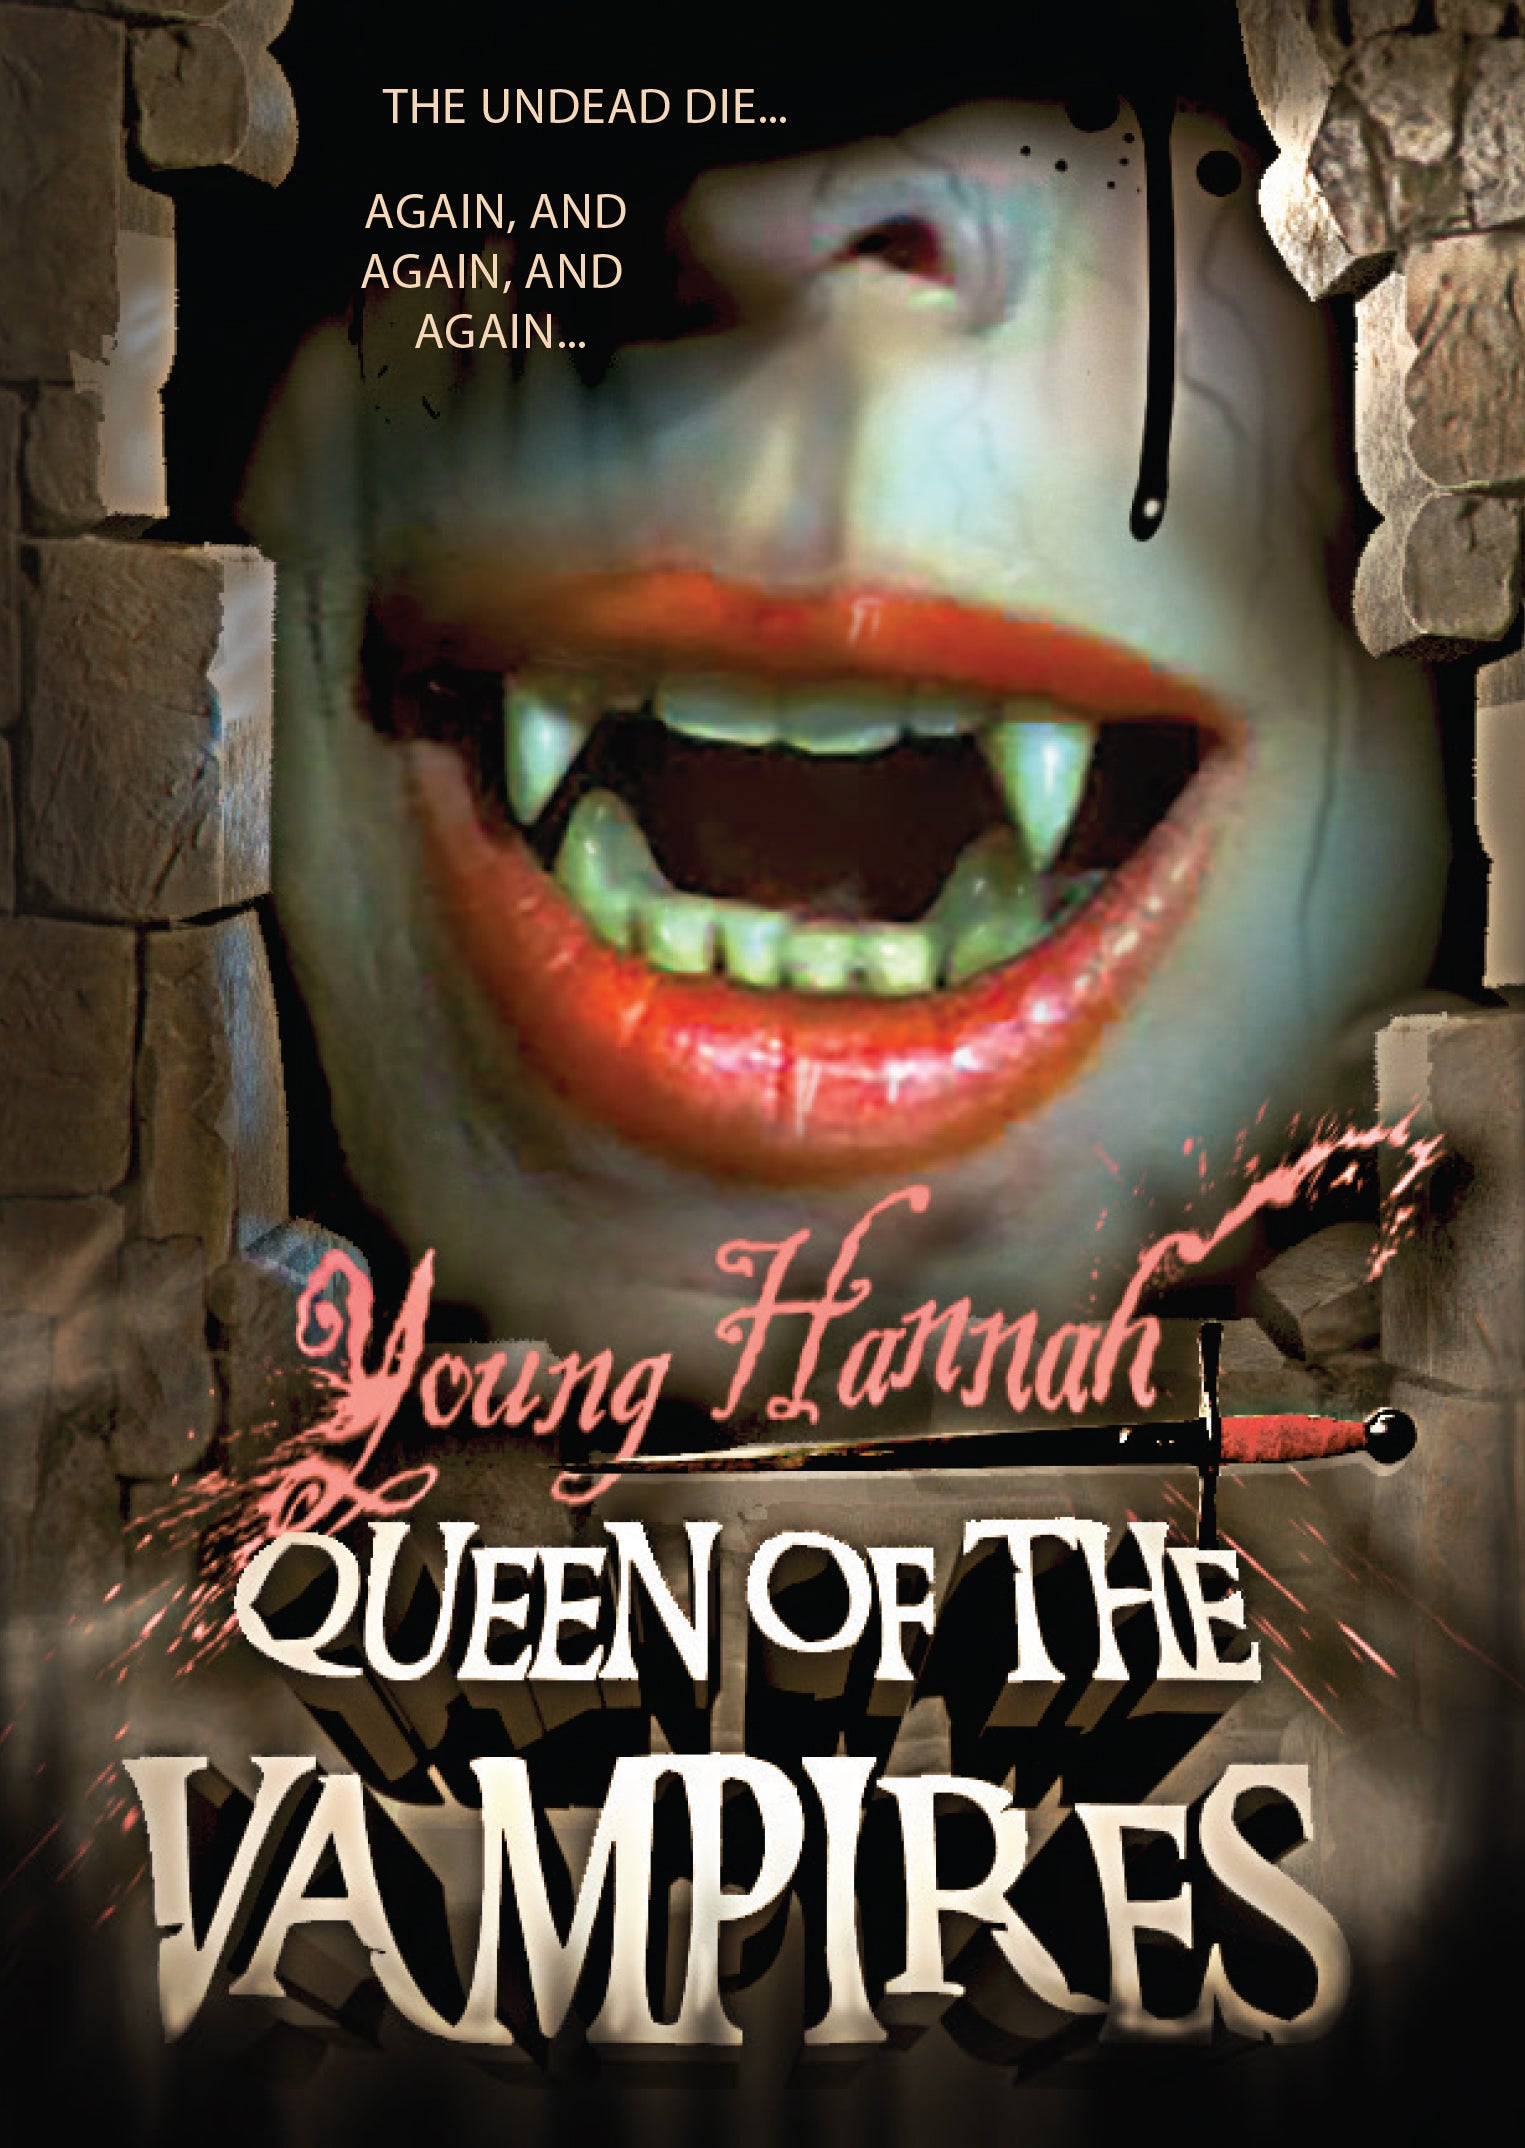 YOUNG HANNAH: QUEEN OF THE VAMPIRES DVD